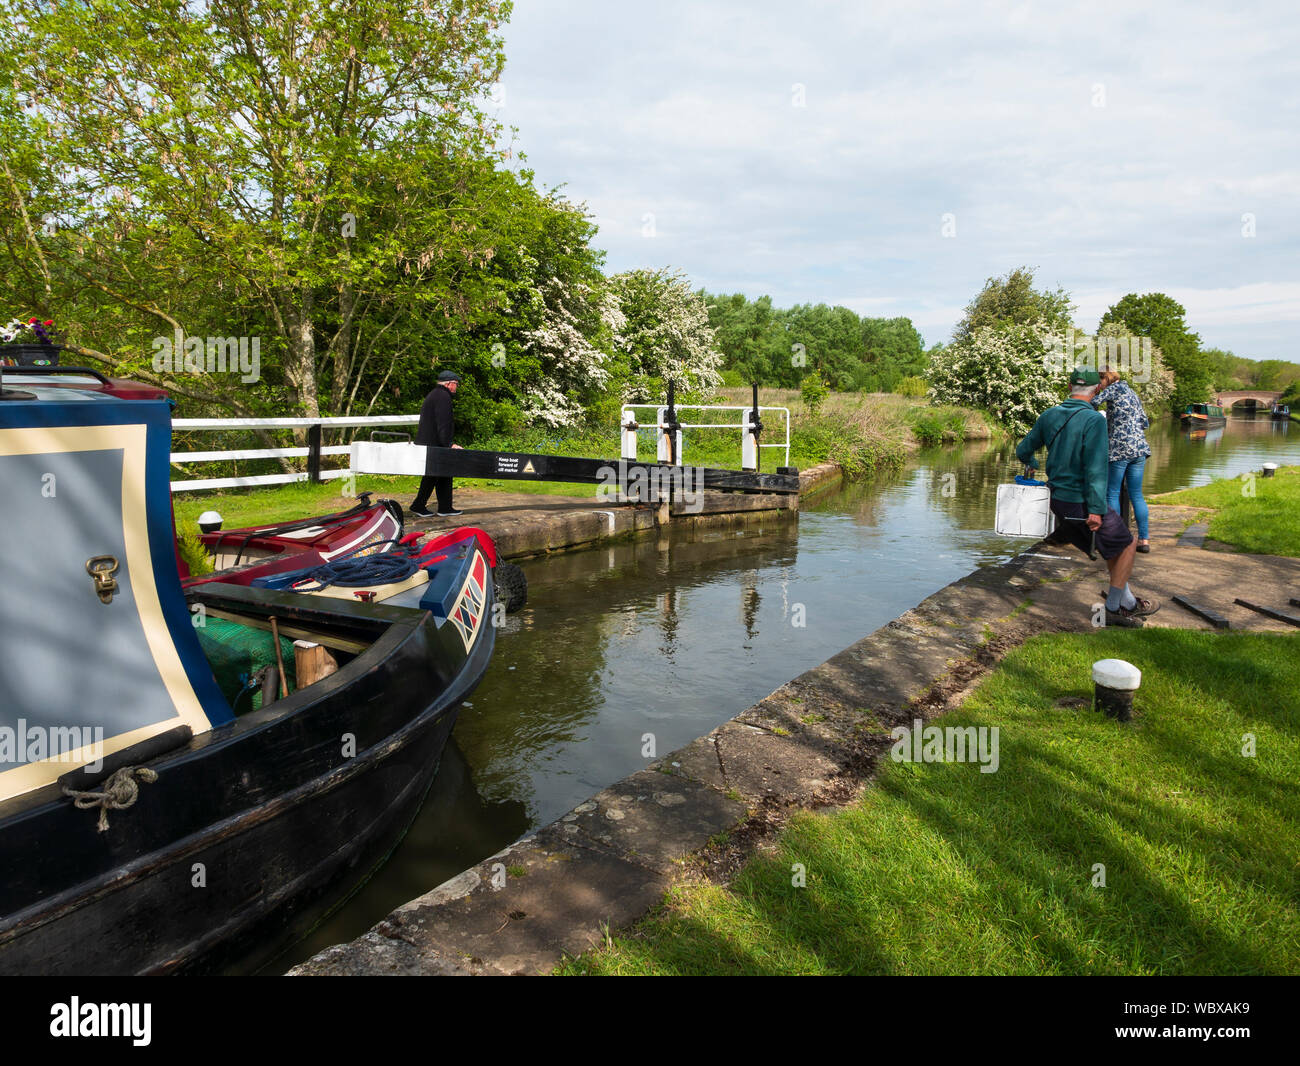 Canal boat in a lock, The Grand Union Canal, Northamptonshire, England, UK. Stock Photo